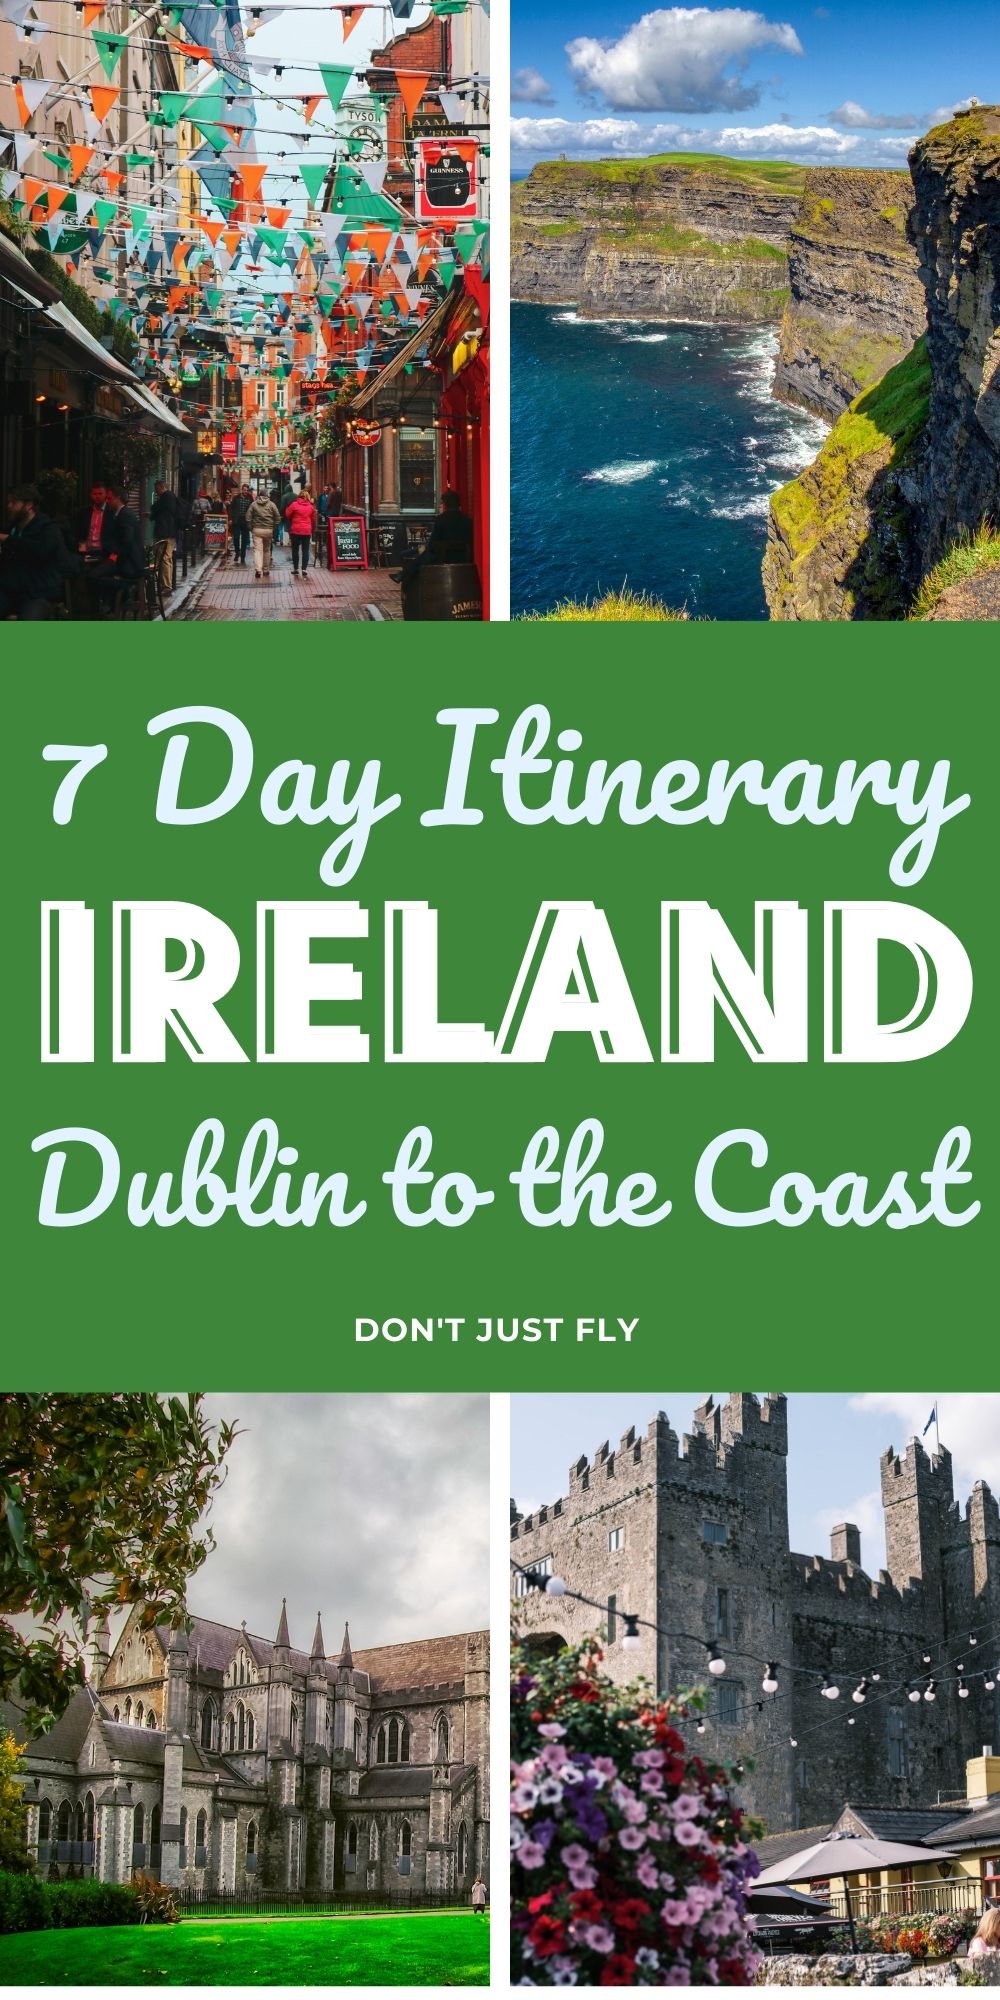 A photo collage shows the landmarks from the Ireland itinerary.